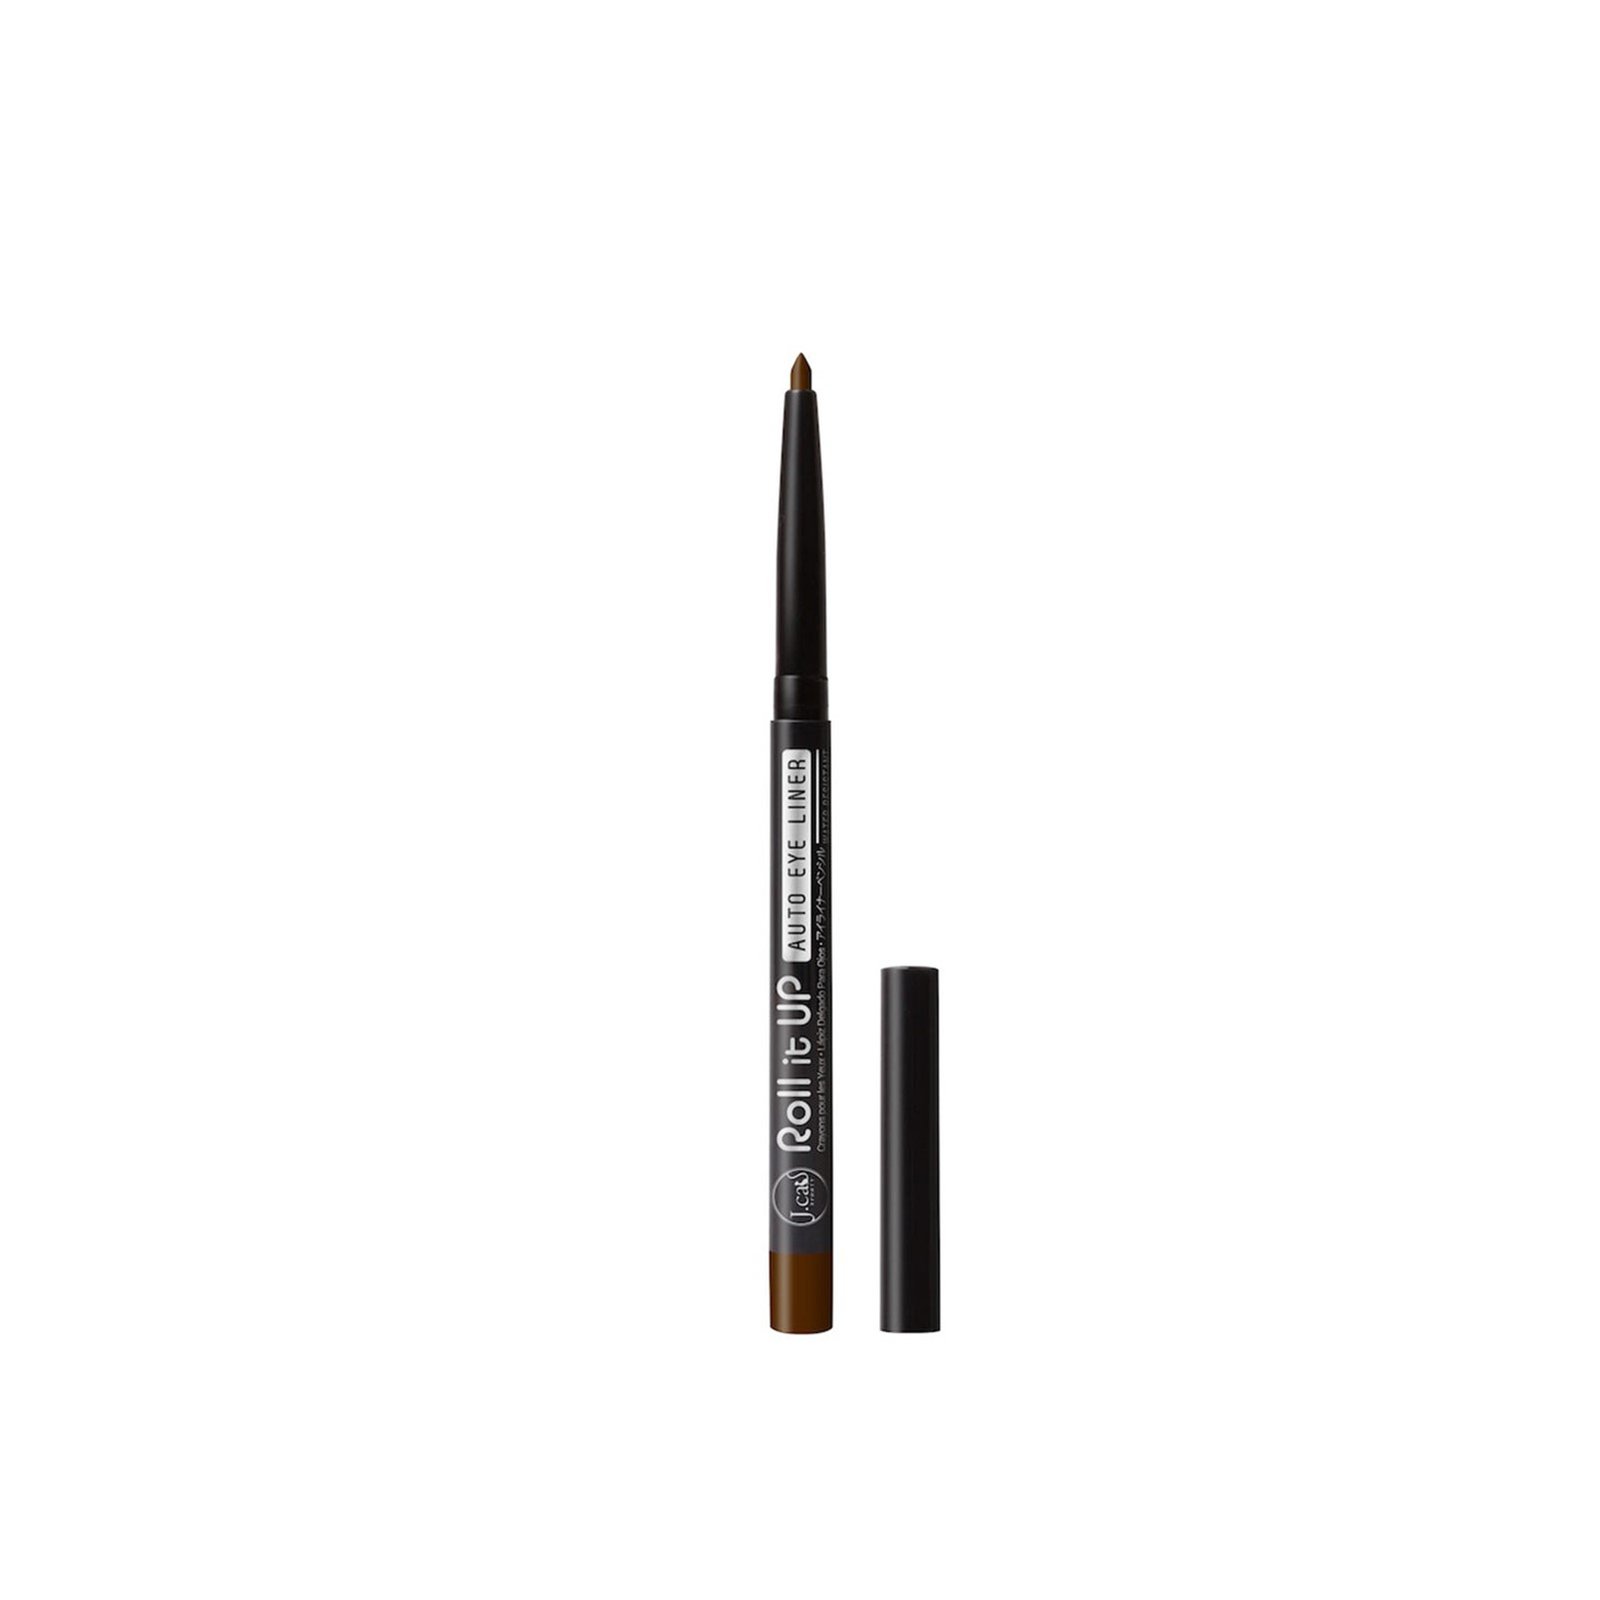 J.Cat Roll It Up Auto Eyeliner 107 Brown 0.3g